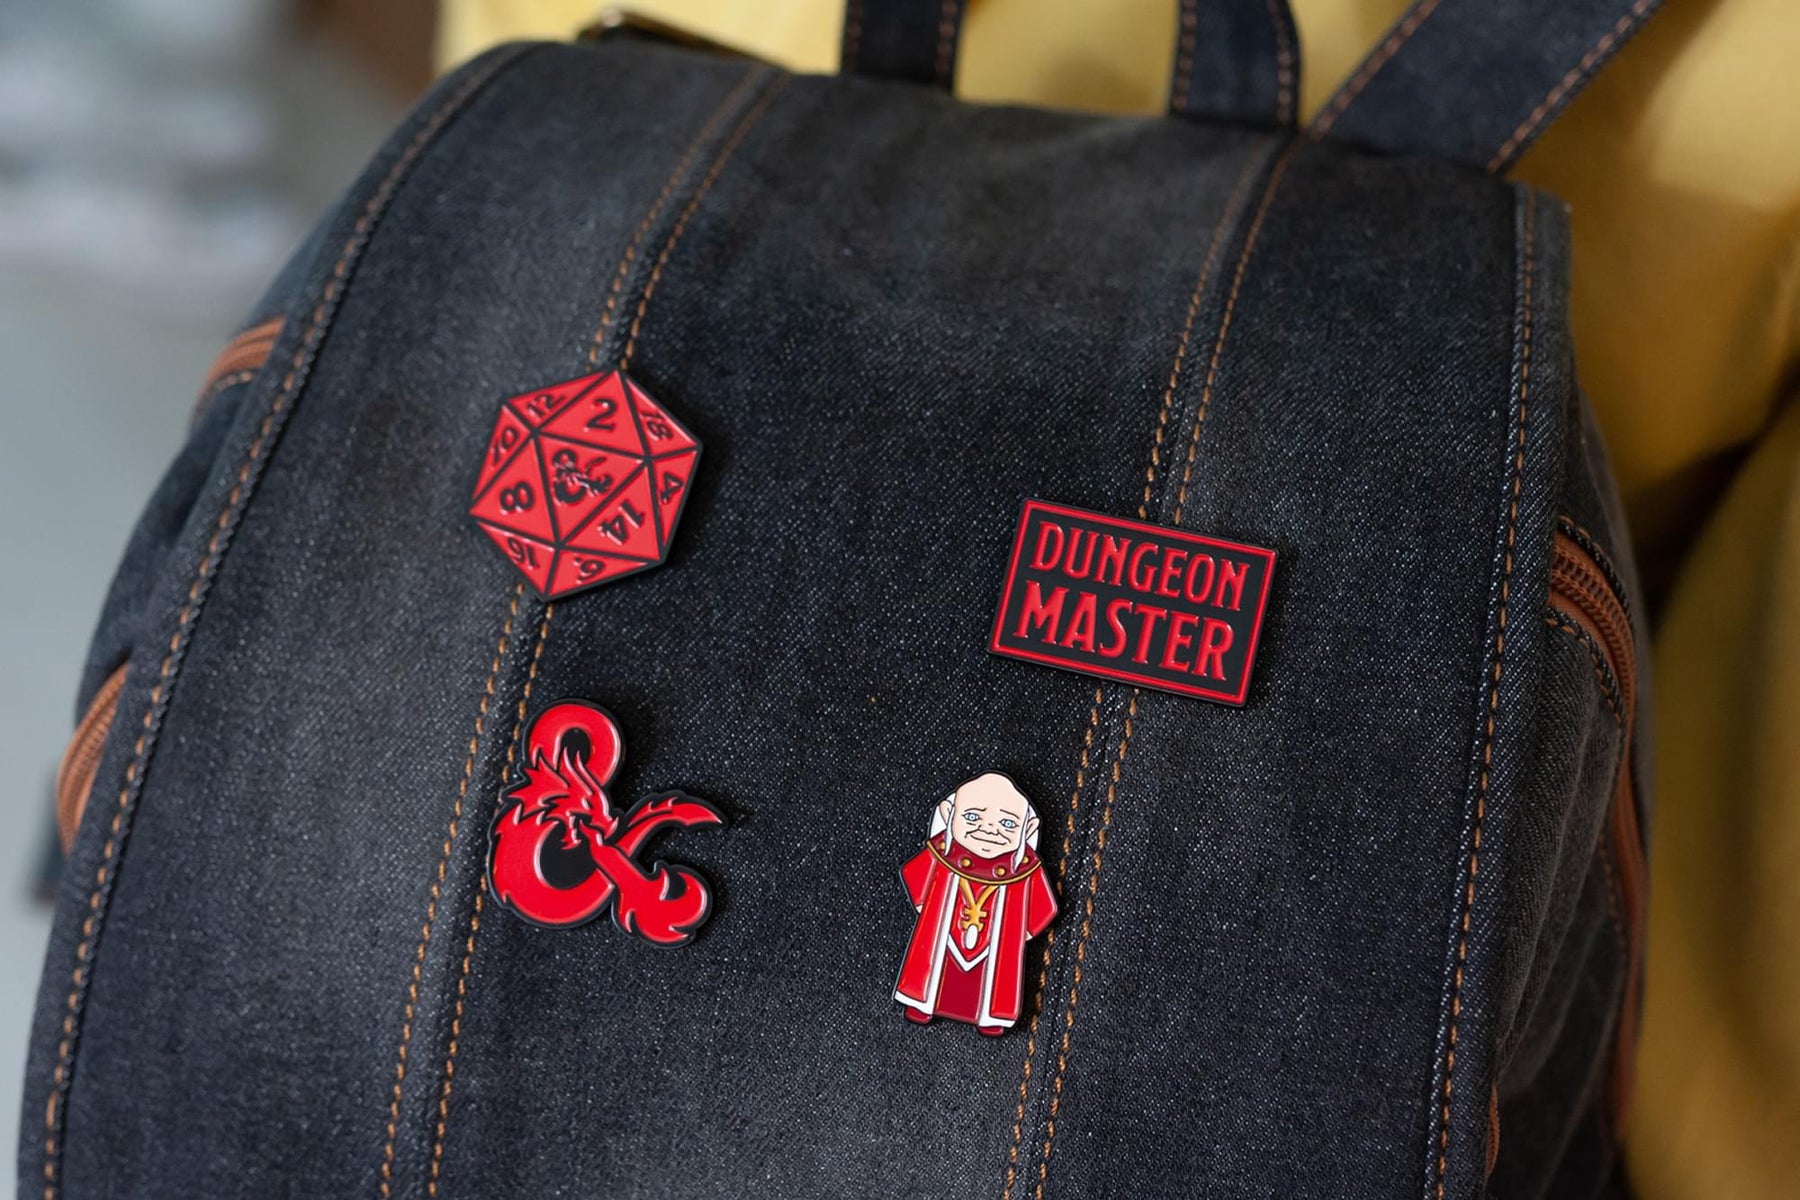 Dungeons & Dragons Enamel Pin Set | Exclusive Collectors Series Pins | Set of 4